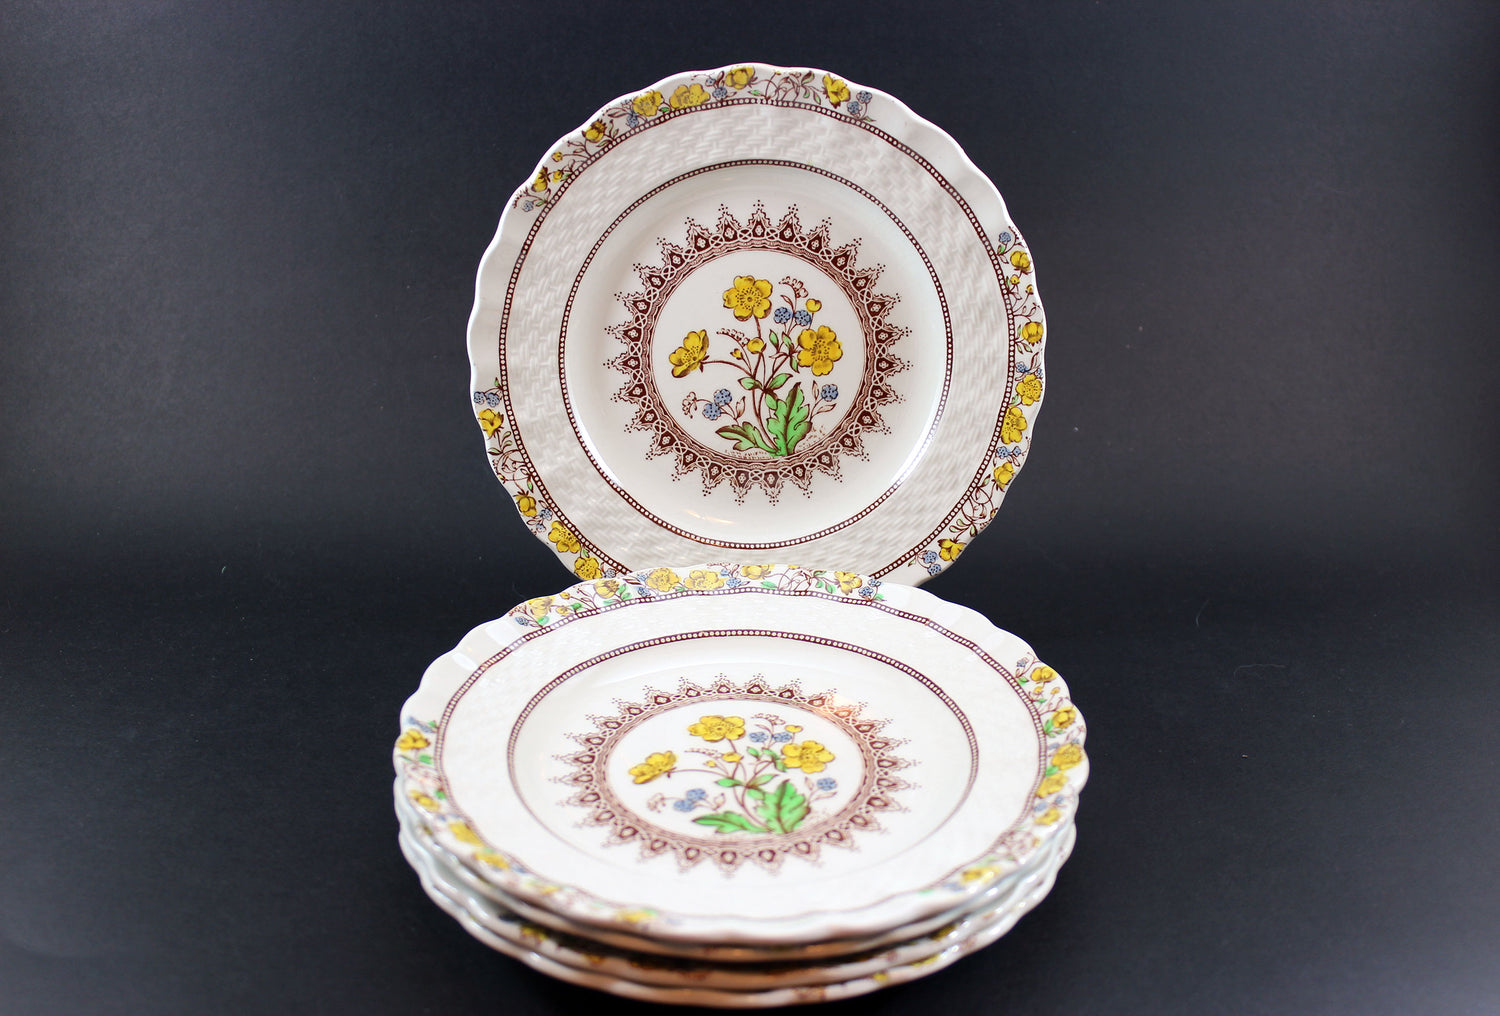 Spode Buttercup, Bread and Butter Plate